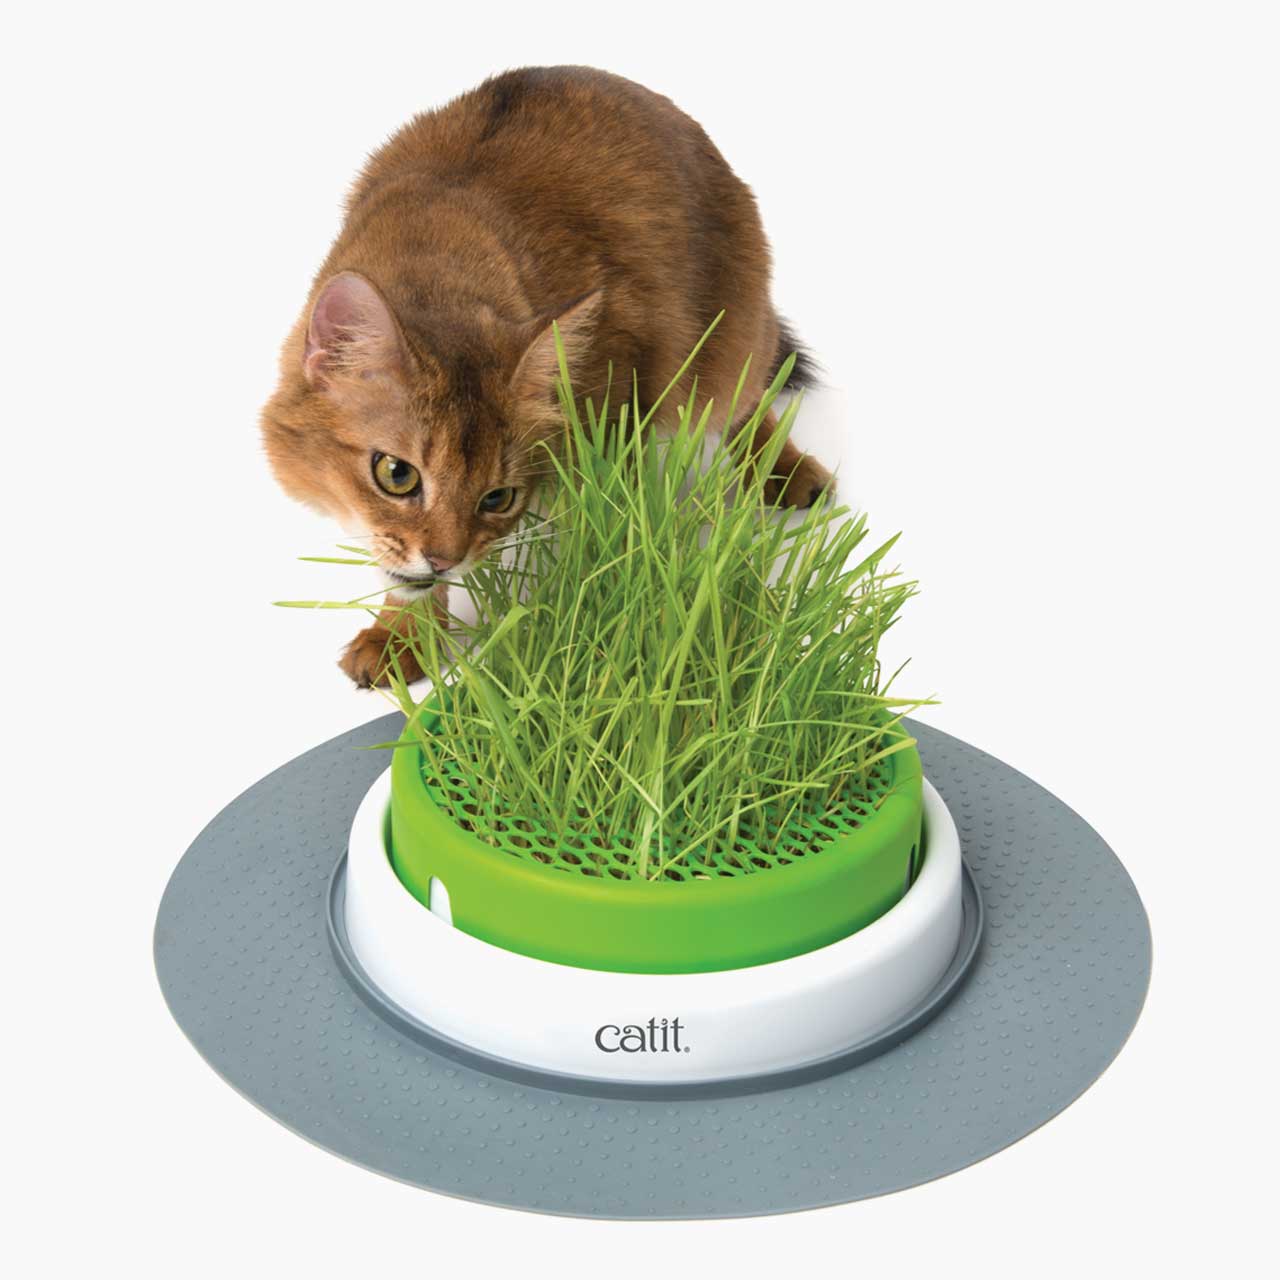 Cat chewing grass from Grass Planter